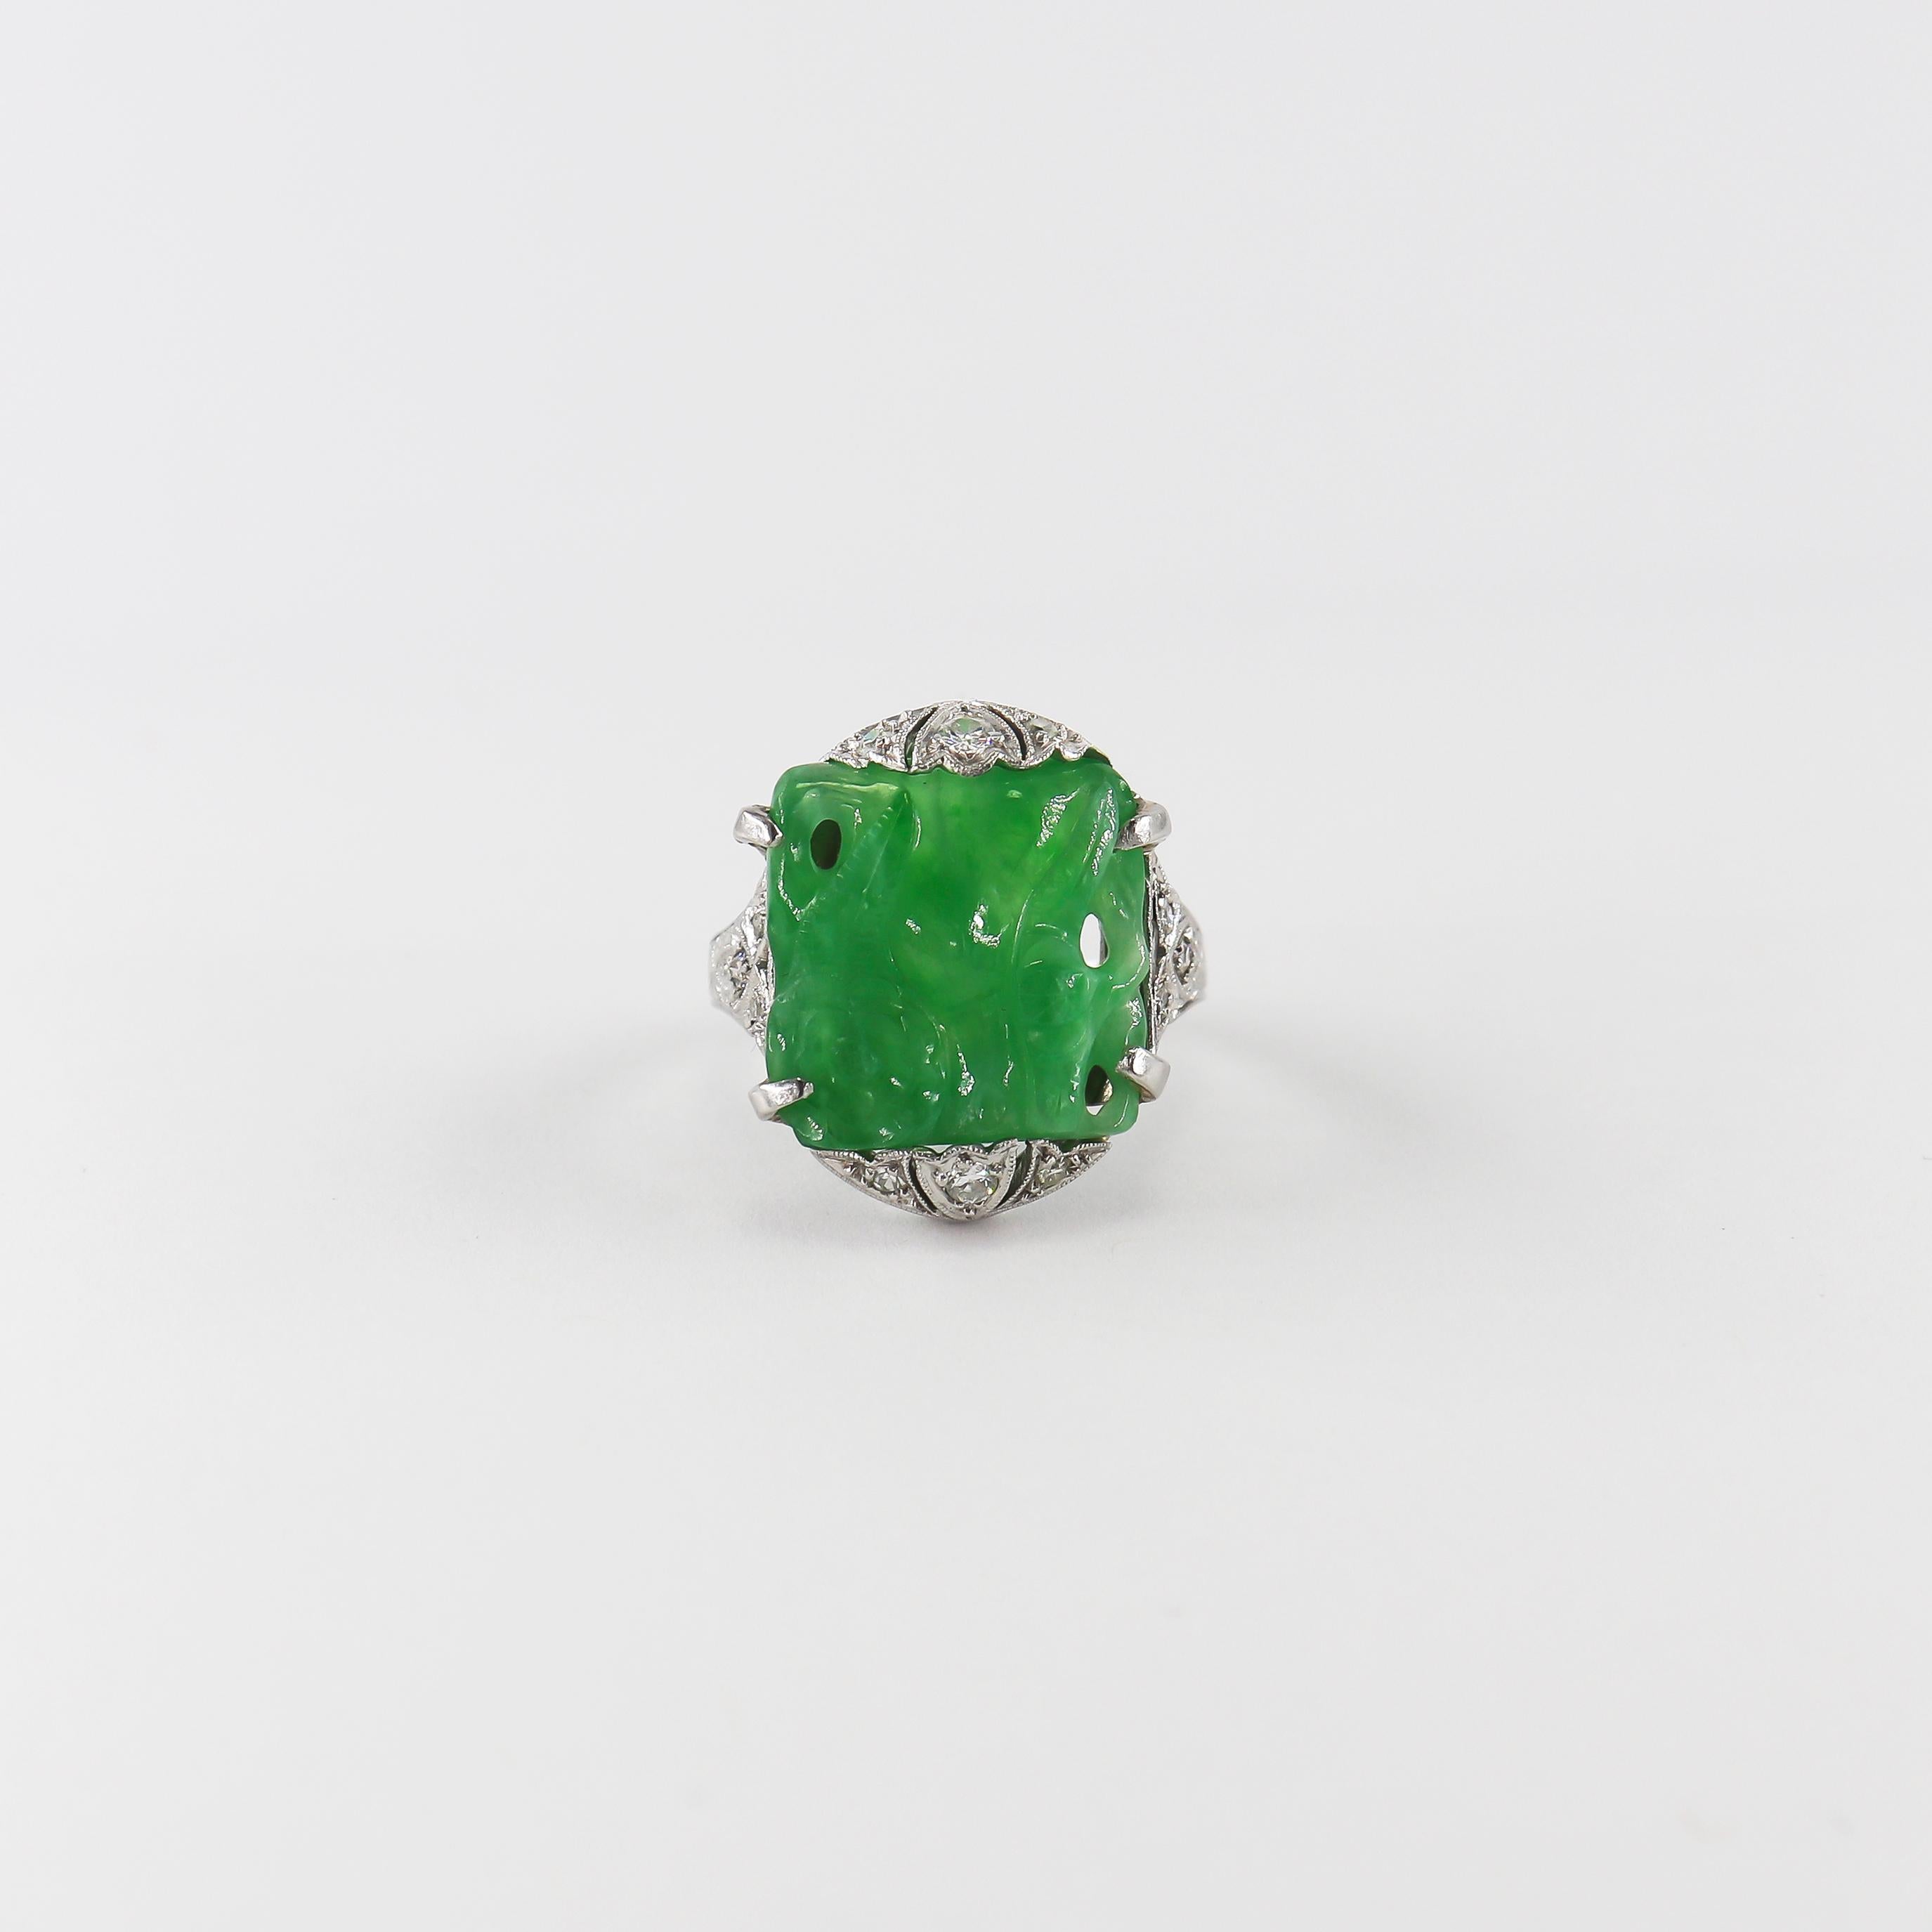 This incredible acquisition by the house of J. Birnbach features a square, carved piece of Jadeite with floral motifs on both the front and back of the stone. Set with assorted antique cut diamonds = approximately 0.20 carat total weight, this piece